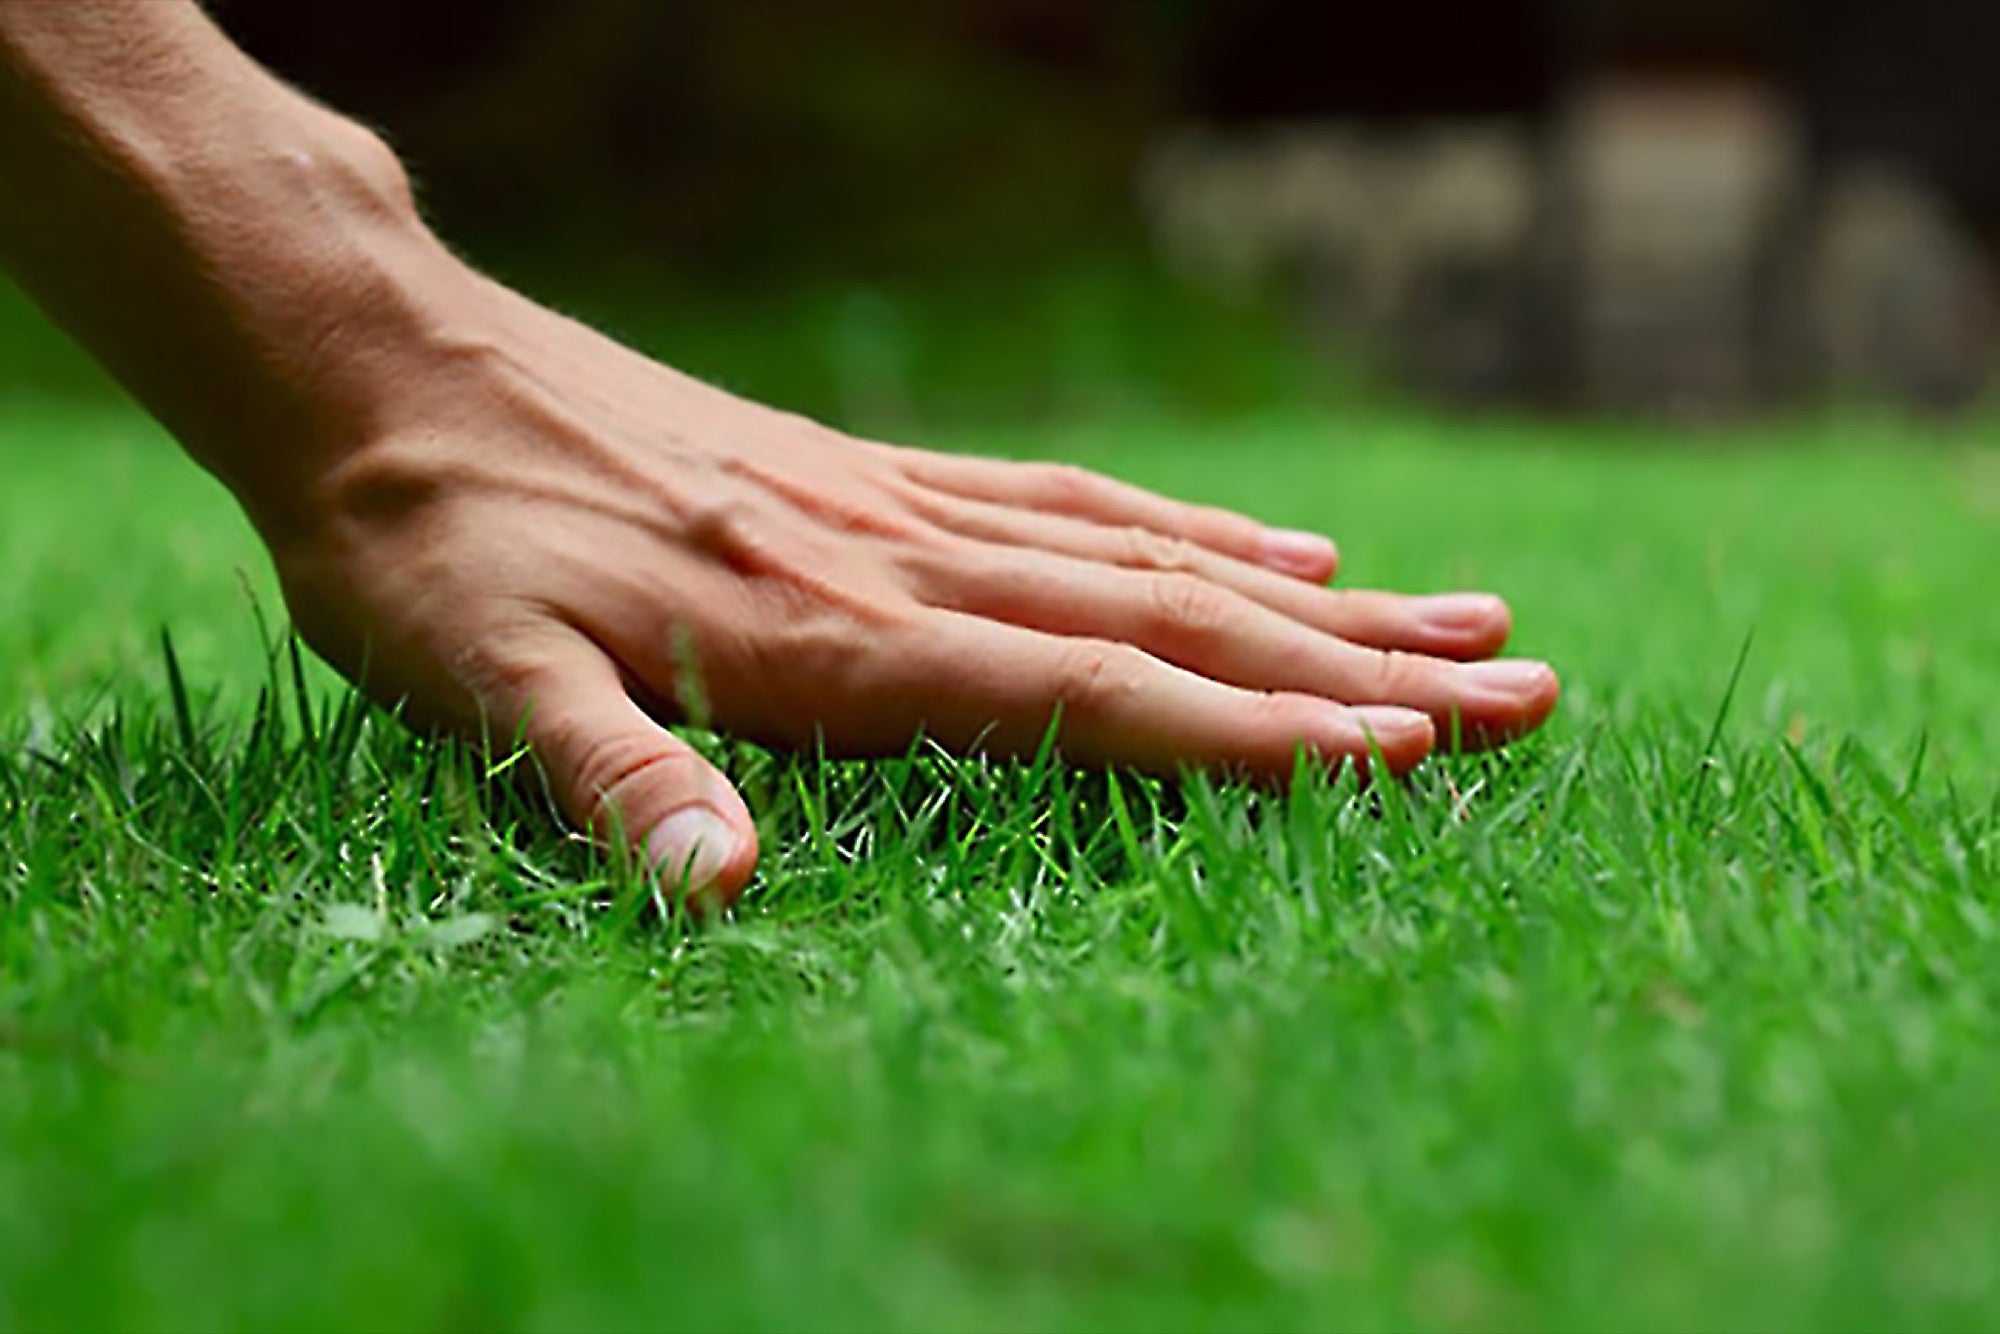 5 Creative Ways to Cut Grass Without A awn Mower